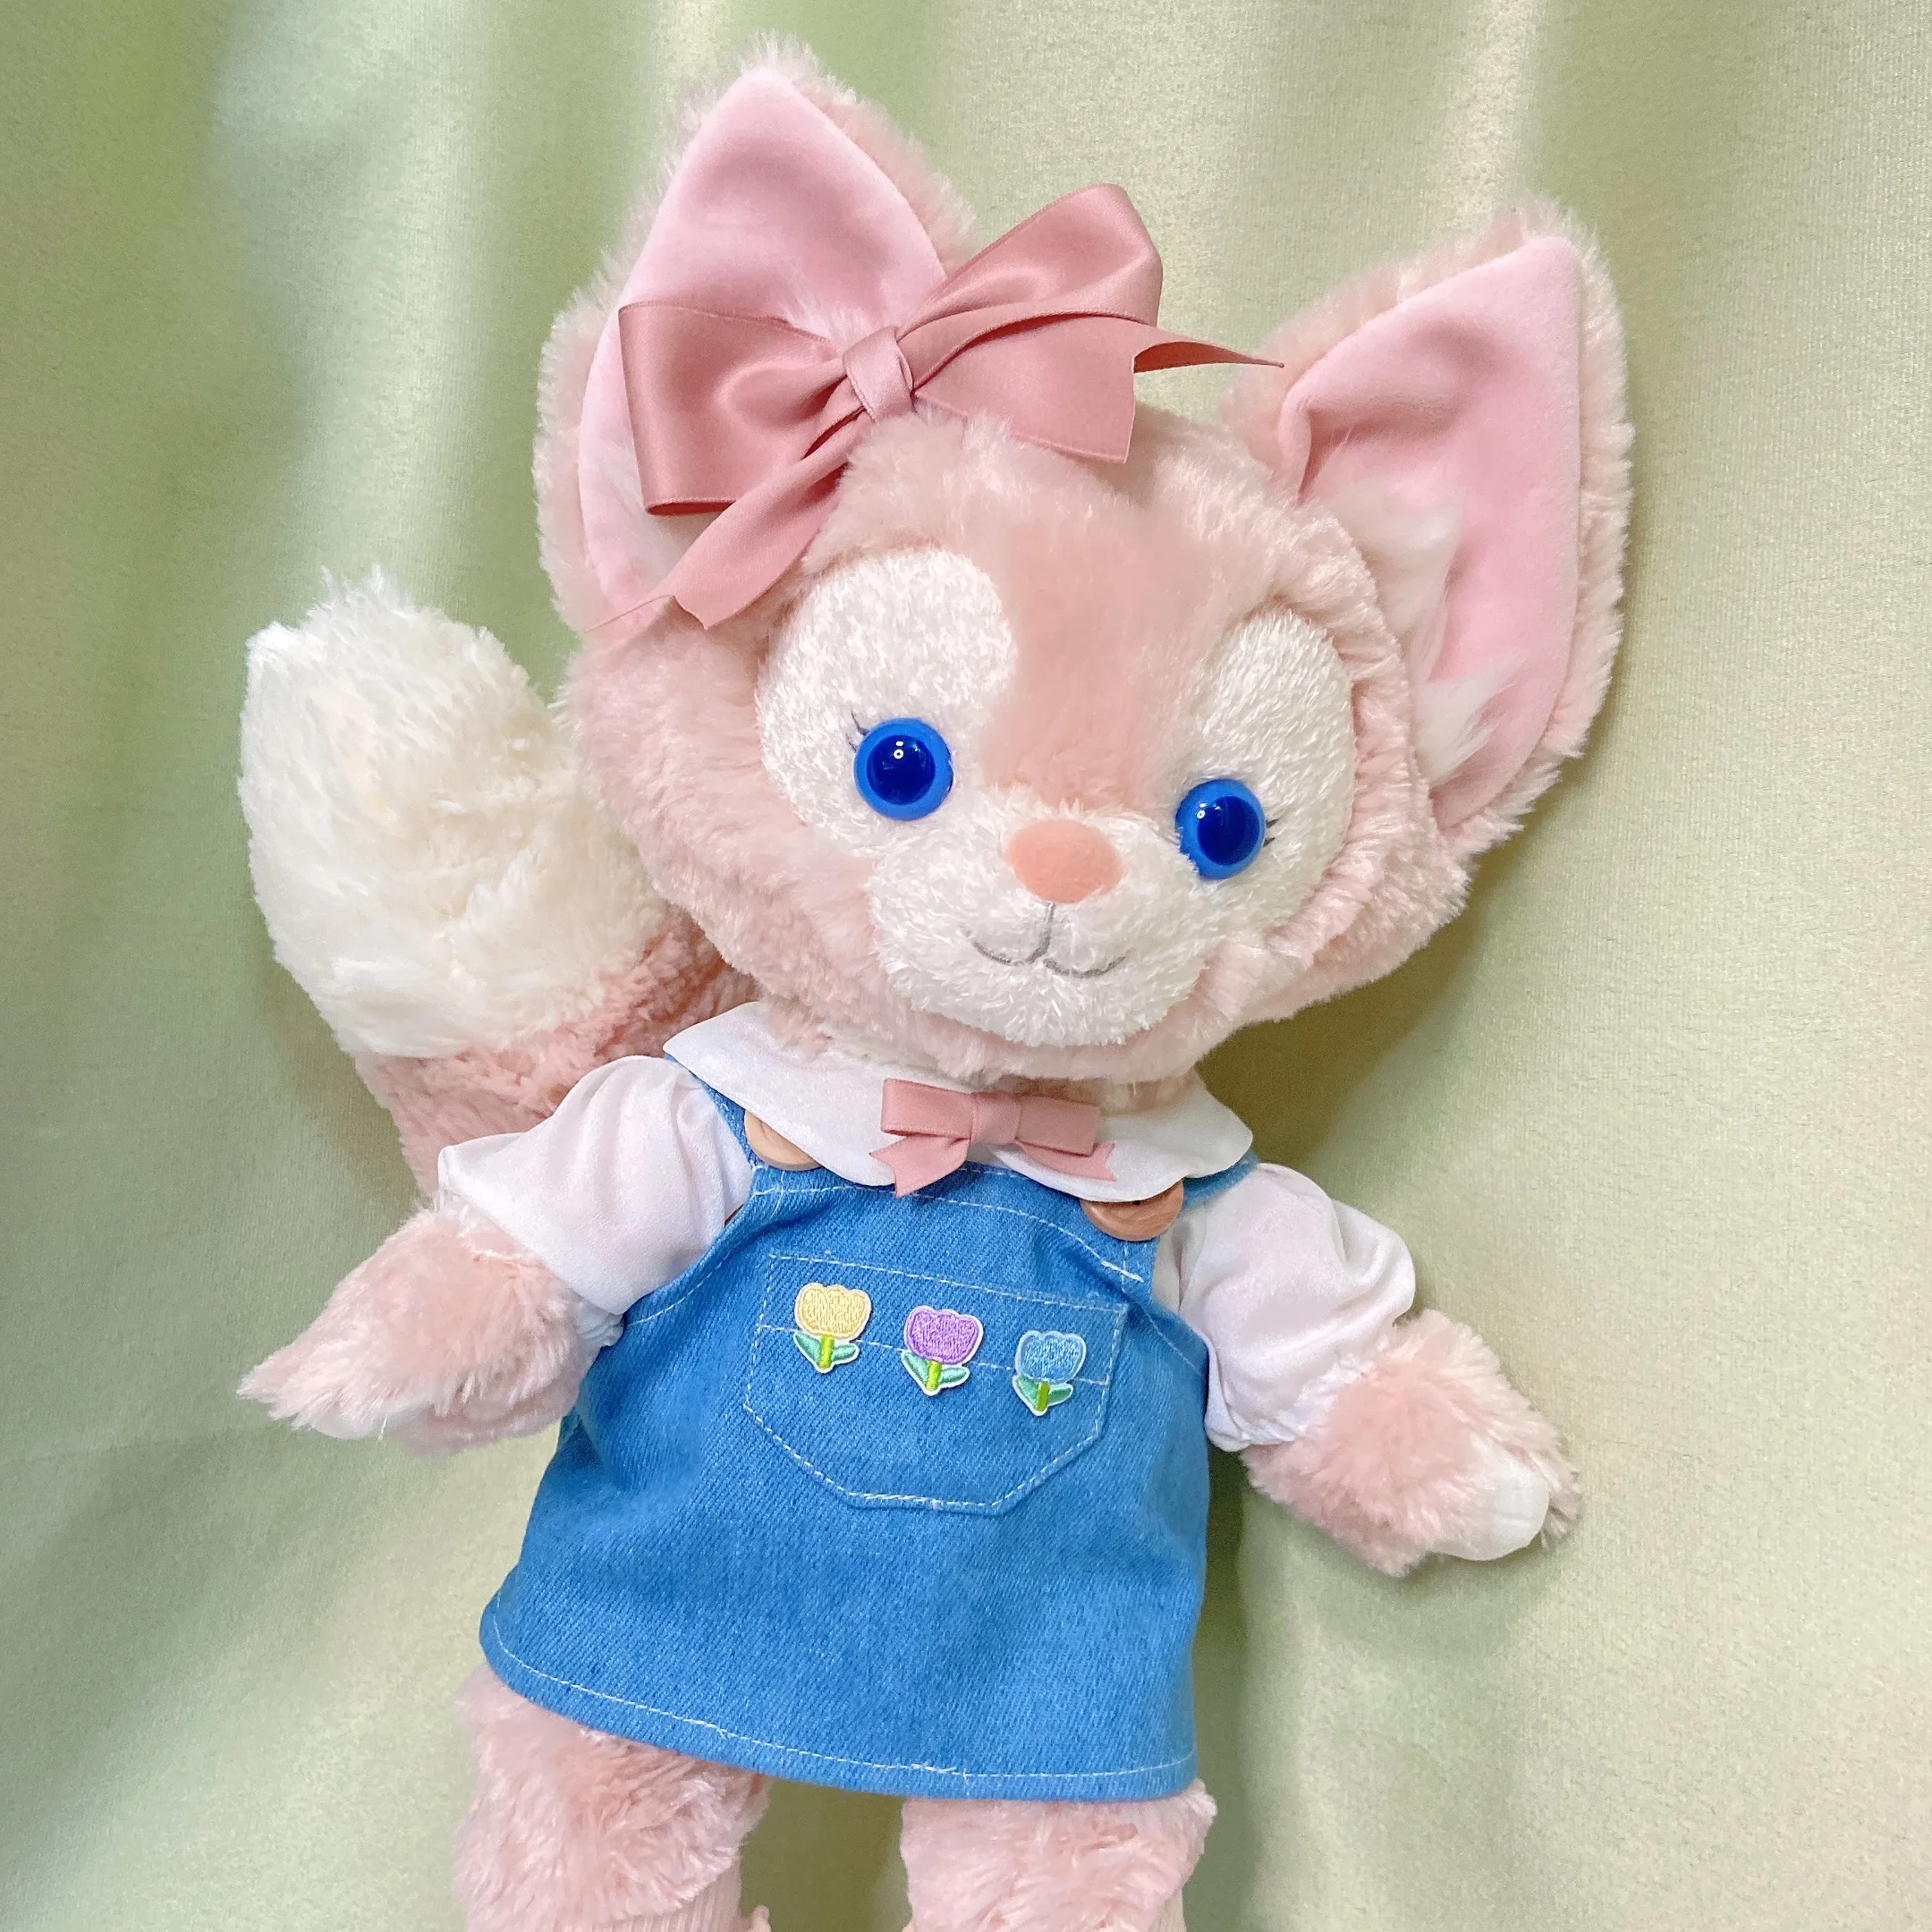 13 inch LinaBell Plush Doll Clothes Stella Lou Clothes Replacement Tulip fabric with blue denim skirt